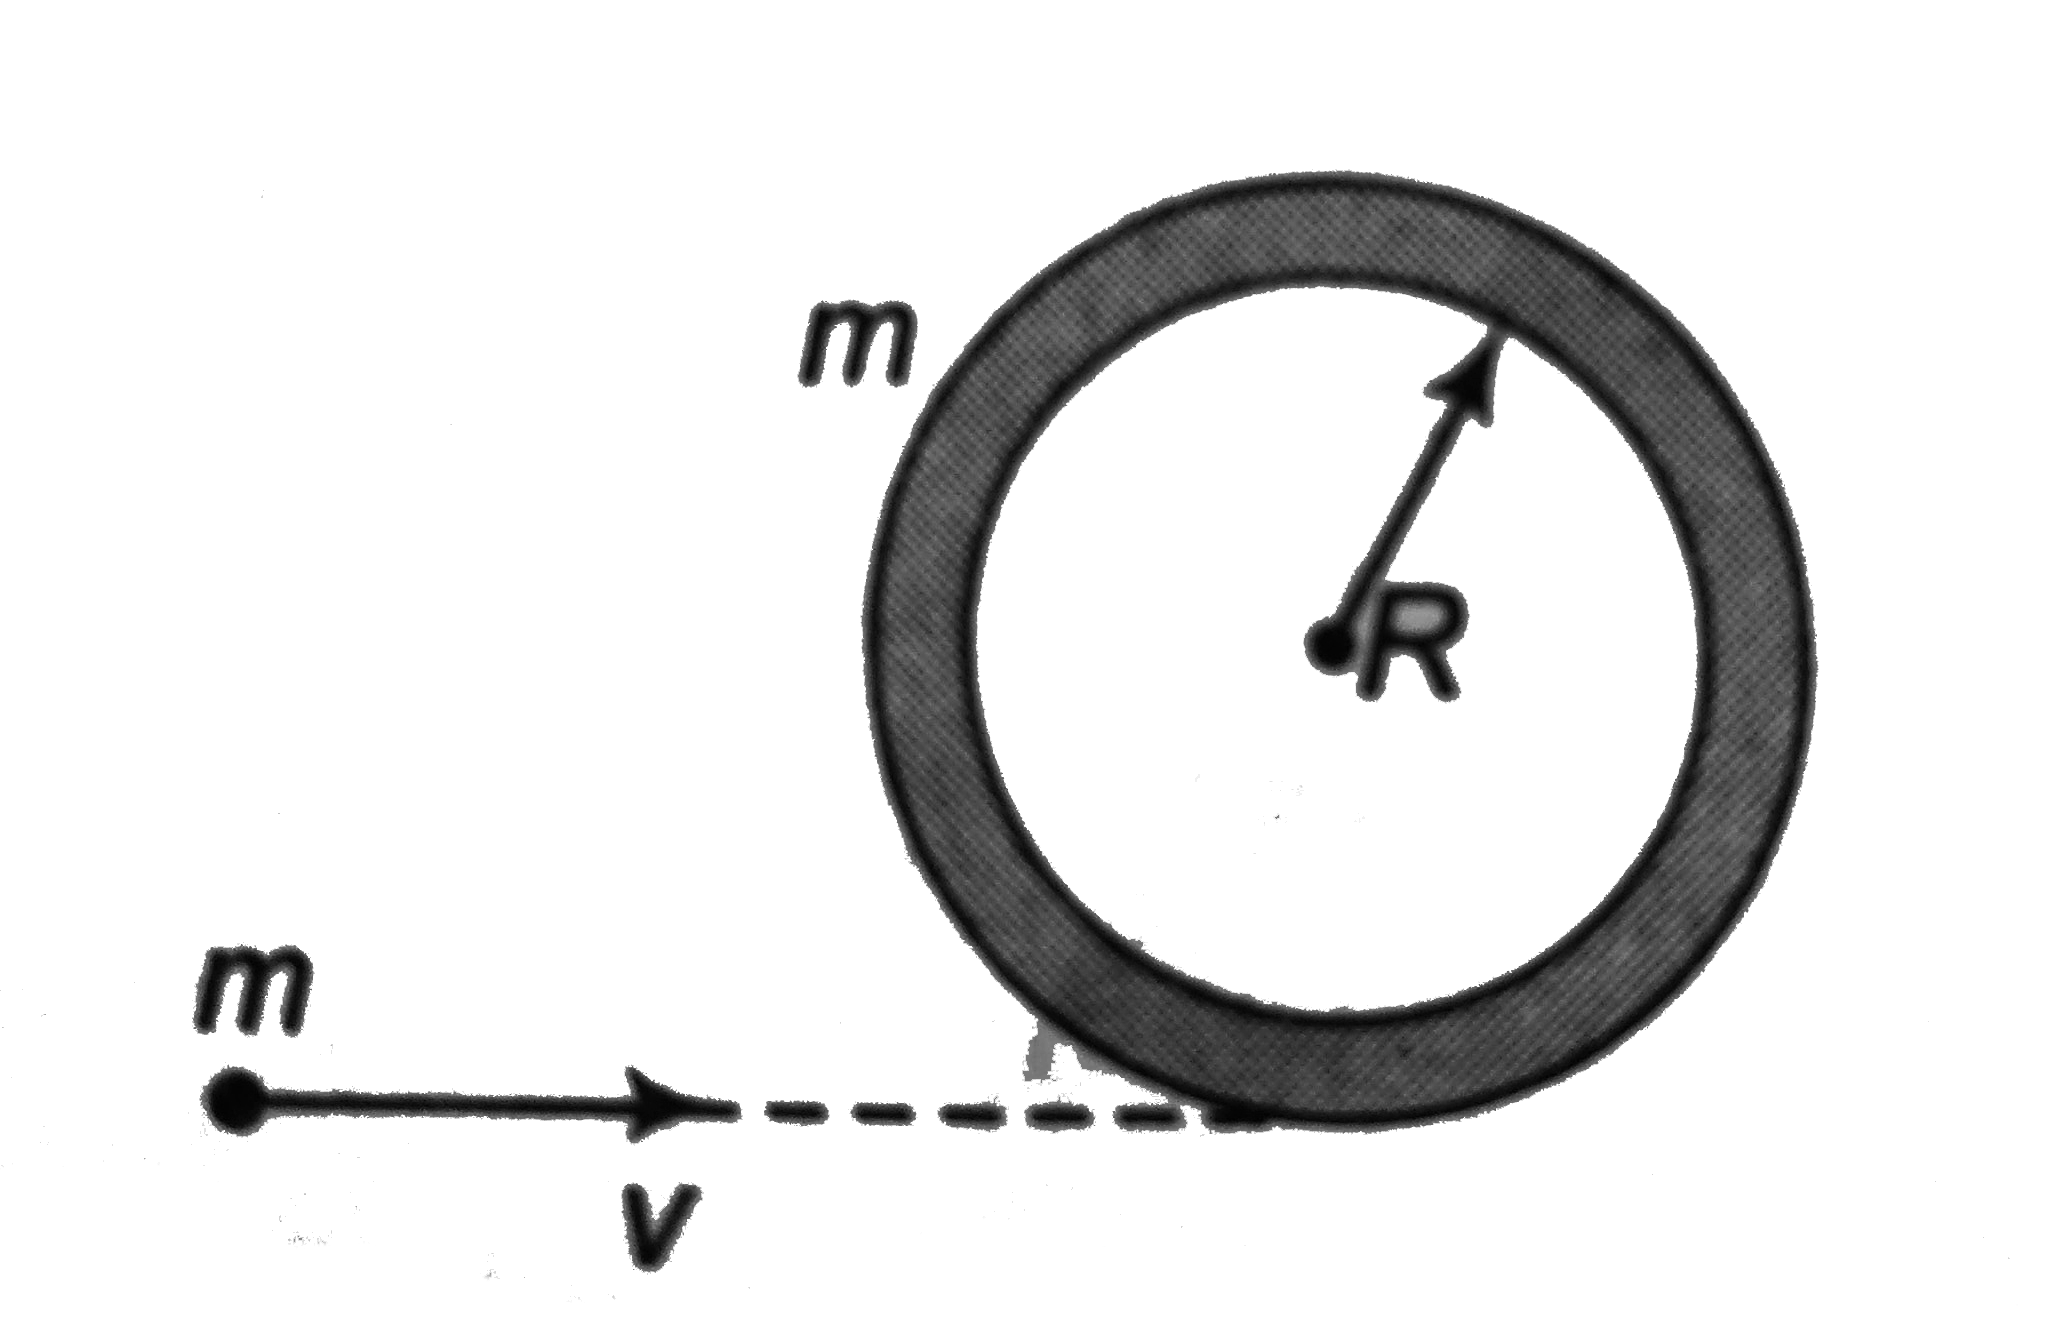 A circular ring of mass m and radius R rests flat on a horizontal smooth surface as shown in figure. A particle of mass m, and moving with a velocity v. Collides inelastically (e=0) with the ring the angular velocity with which the system rotates after the particle strikes the ring is